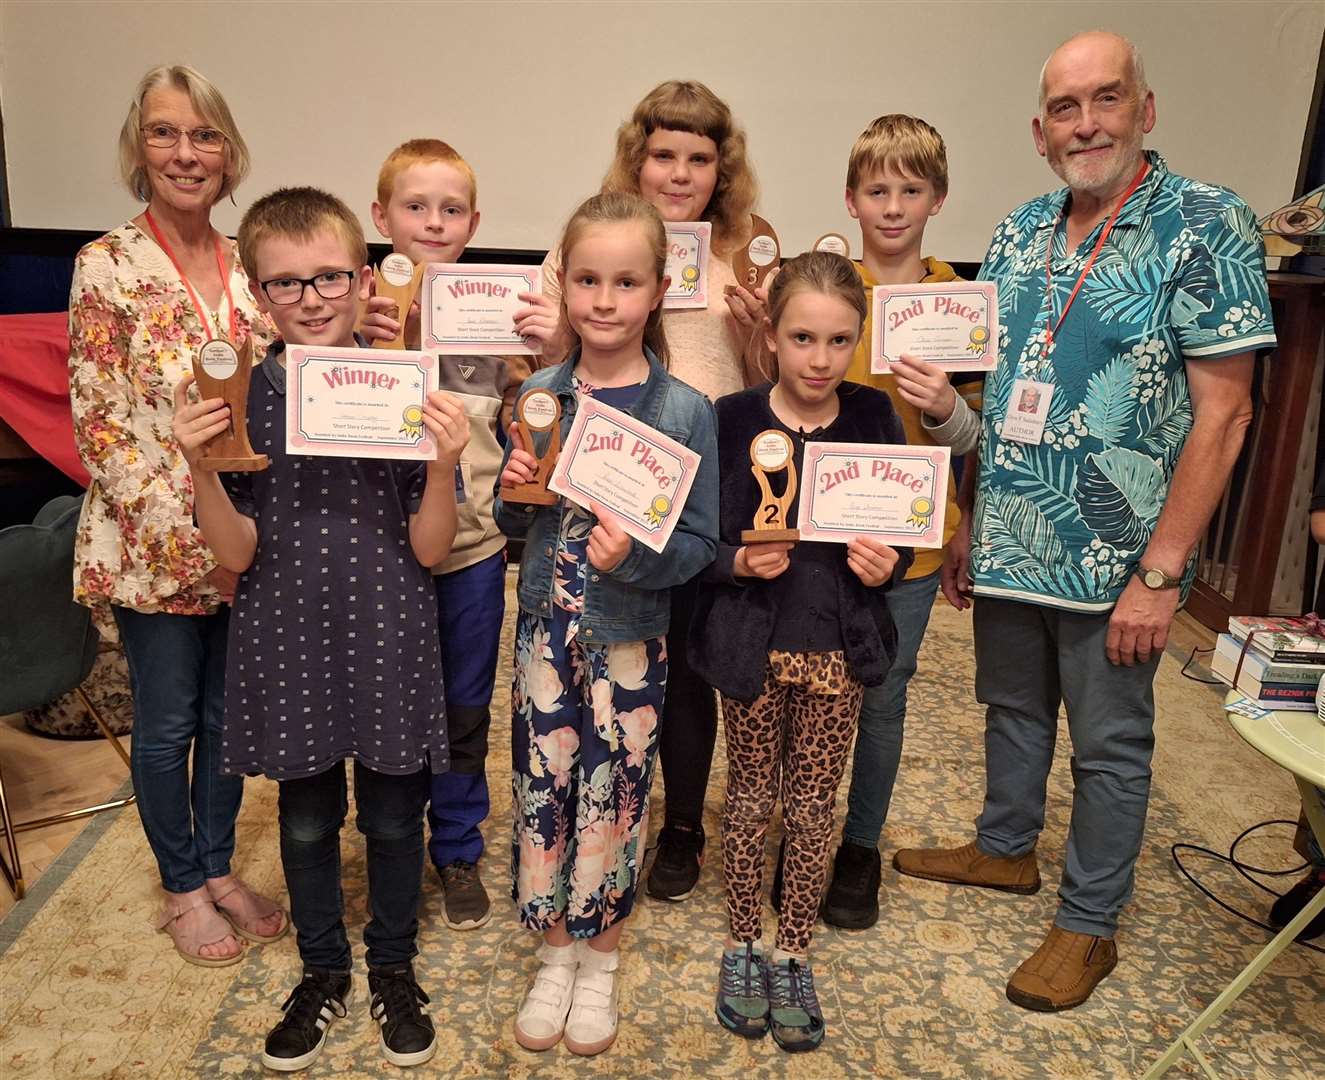 Glyn Salisbury and Carolyn Bilyard with winners from Caithness who were present to receive their awards and certificates on the night. Back row, from left: Jack Robertson, Larissa McPhee and Oliver Currums, all Castletown. Front row, from left: Connor Crossley, Watten, Reese Sutherland, Wick and Paige Stoneman, Castletown.